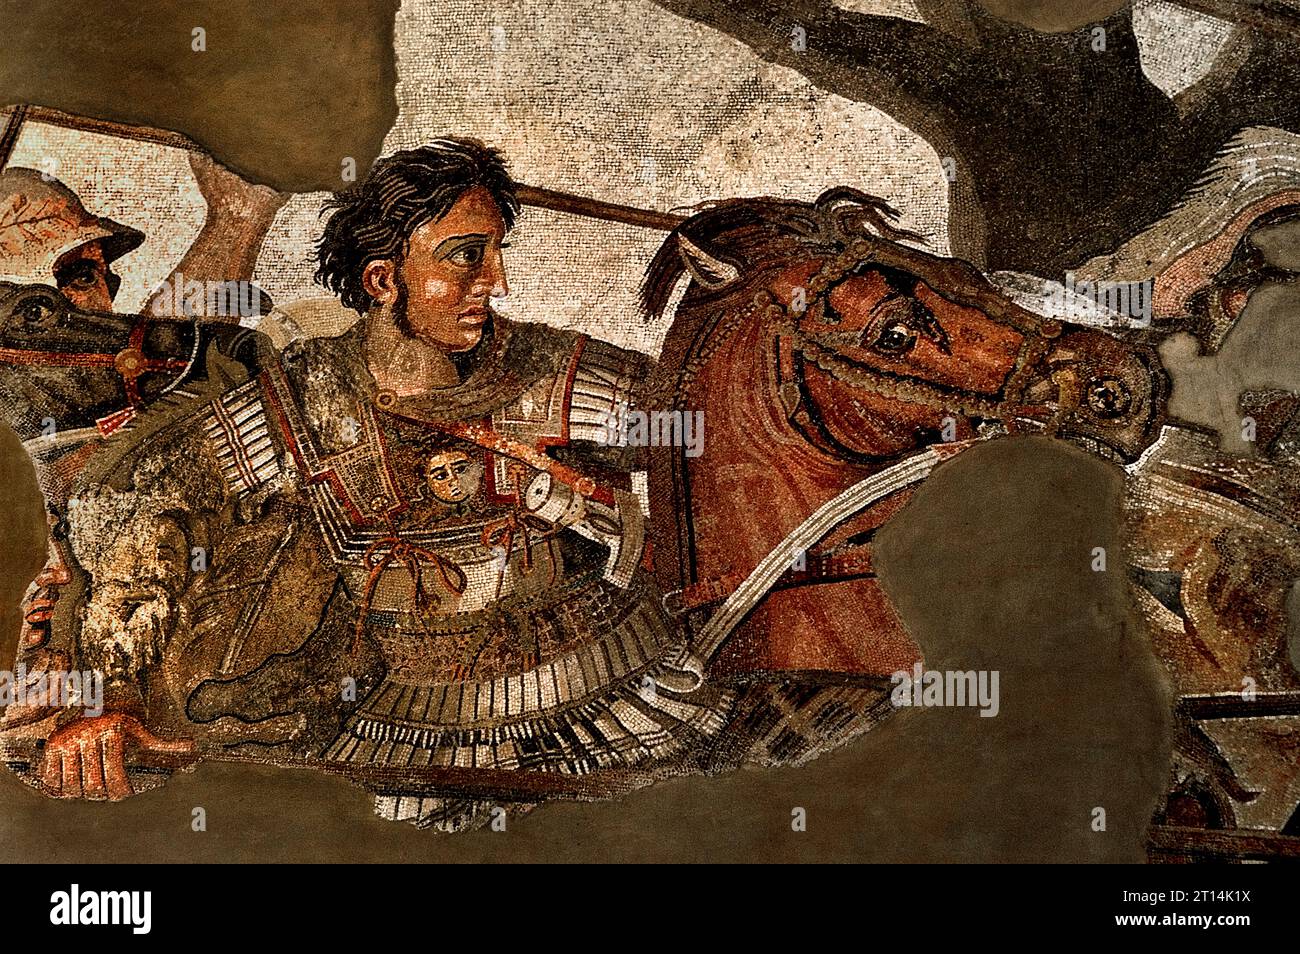 Alexander the Great in battle with Persian King Darius III ,Alexander the Great Issus 331 B.C. Mosaic from Pompeii ( Alexander the Great, Alexander III of Macedon, 356 BC –  323 BC king of the Ancient Greek kingdom of Macedon from 336 BC until his death in 323 BC. He was one of the greatest military leaders of all time. ) Stock Photo